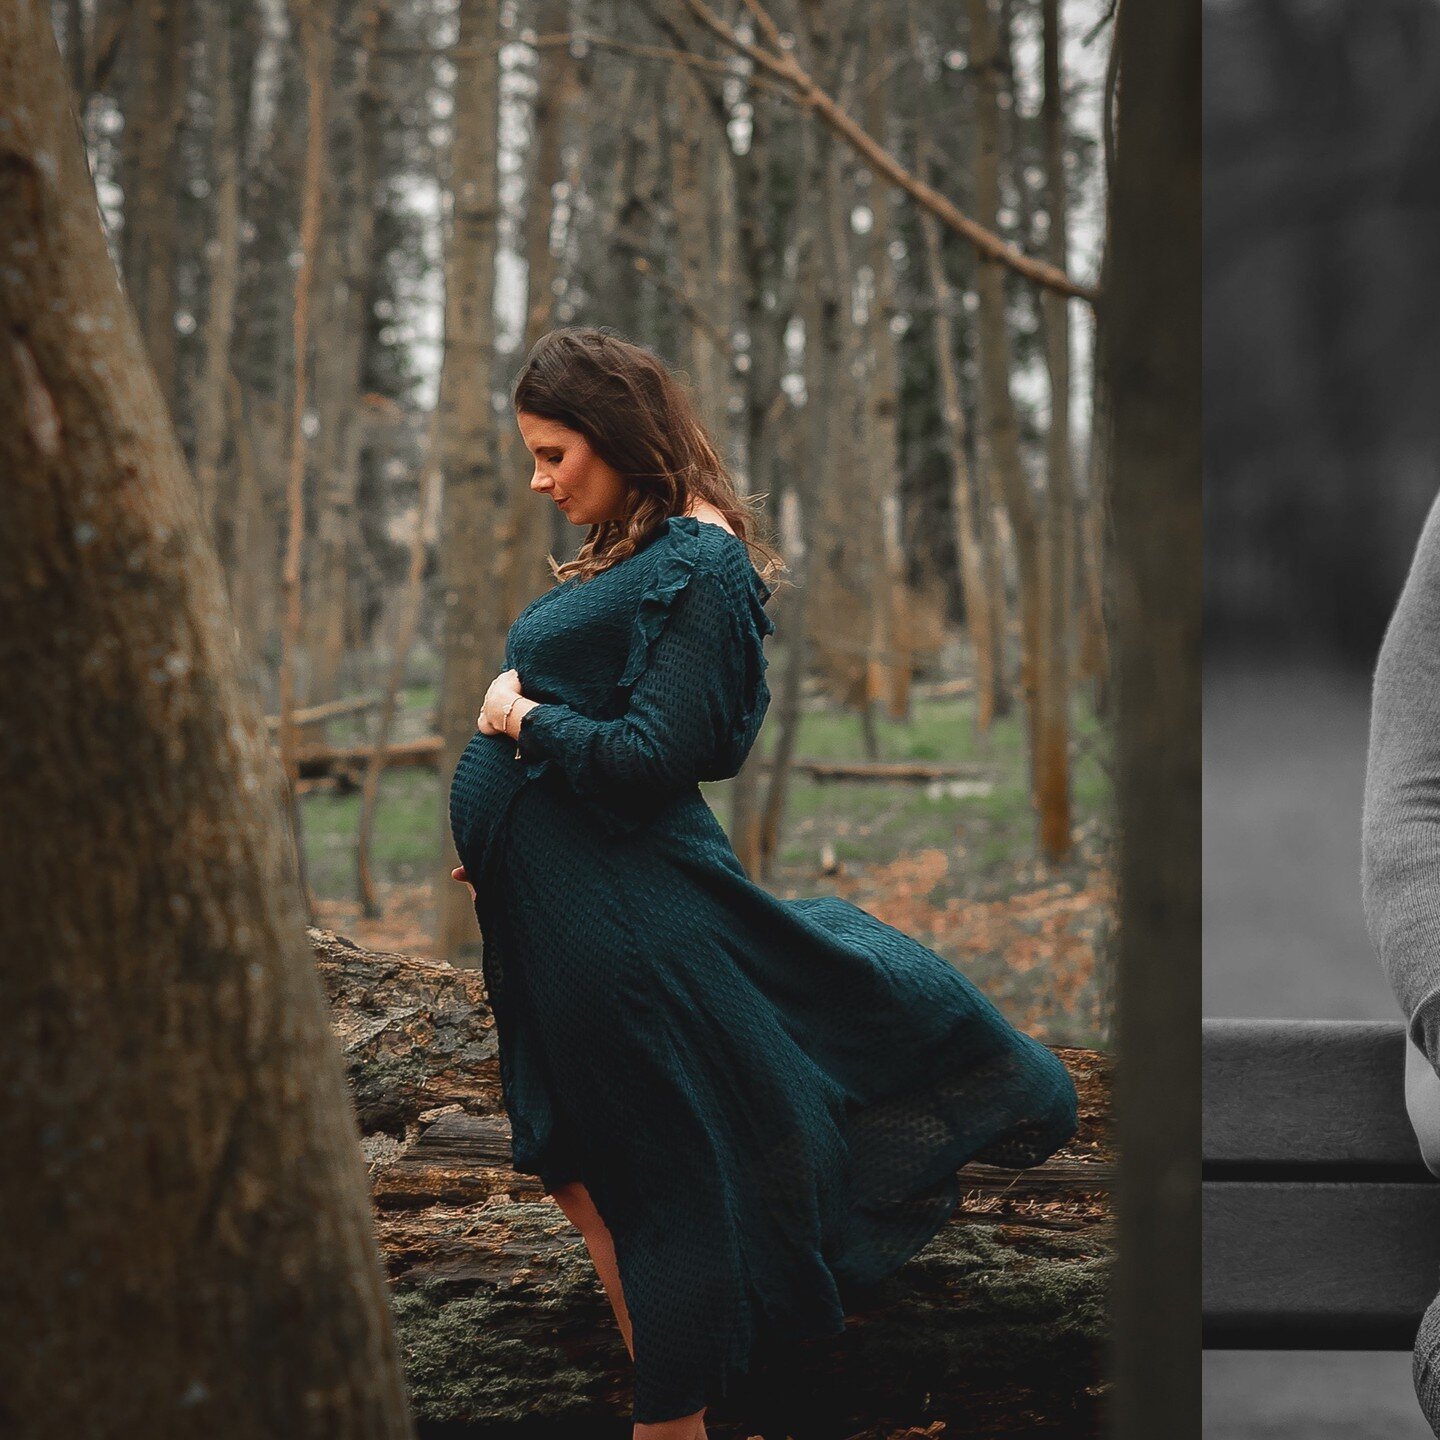 A beautiful maternity photoshoot with Thalita and her family at Crabtree Plantation in Basingstoke

#maternityshoot #familyshoot #crabtreeplantation #basingstoke